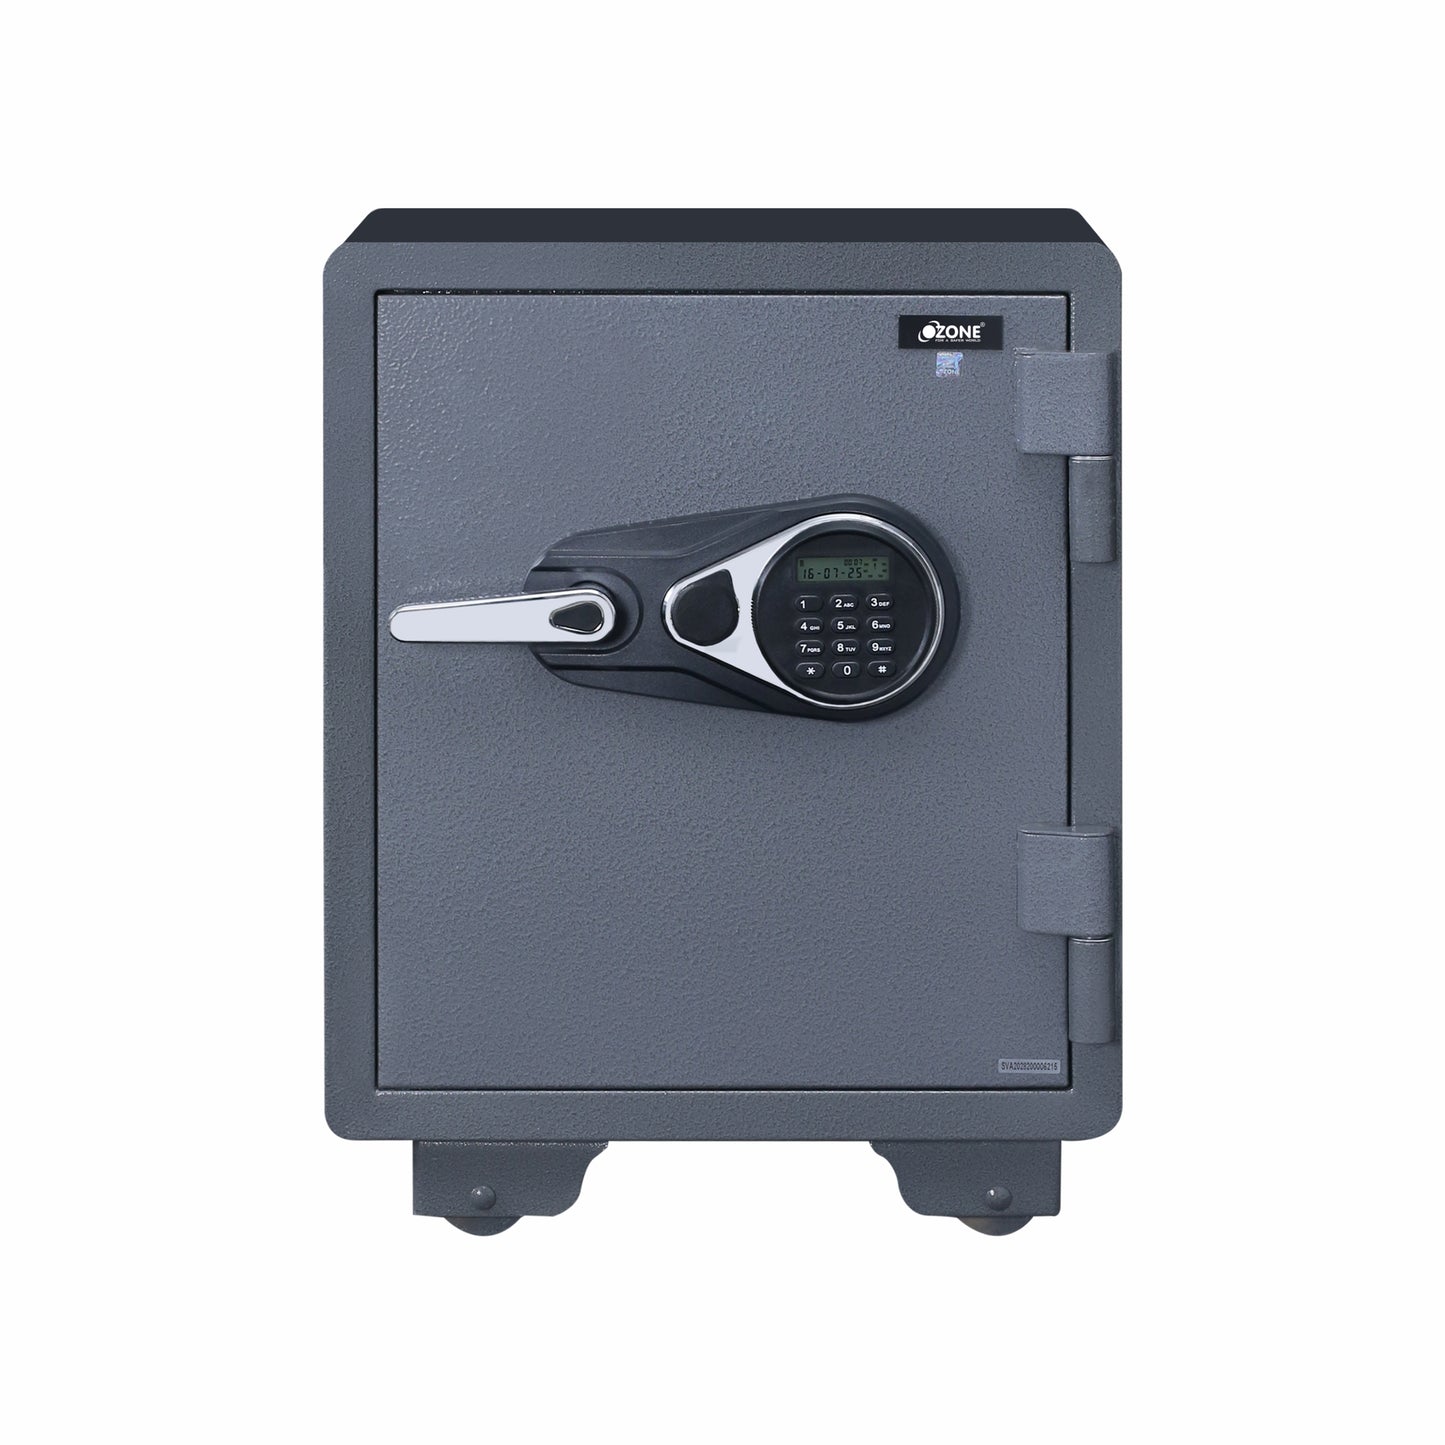 Ozone Fire-resistant Safe for Homes & Offices | 2-way Access | Password & Emergency Key (39 Ltrs.)